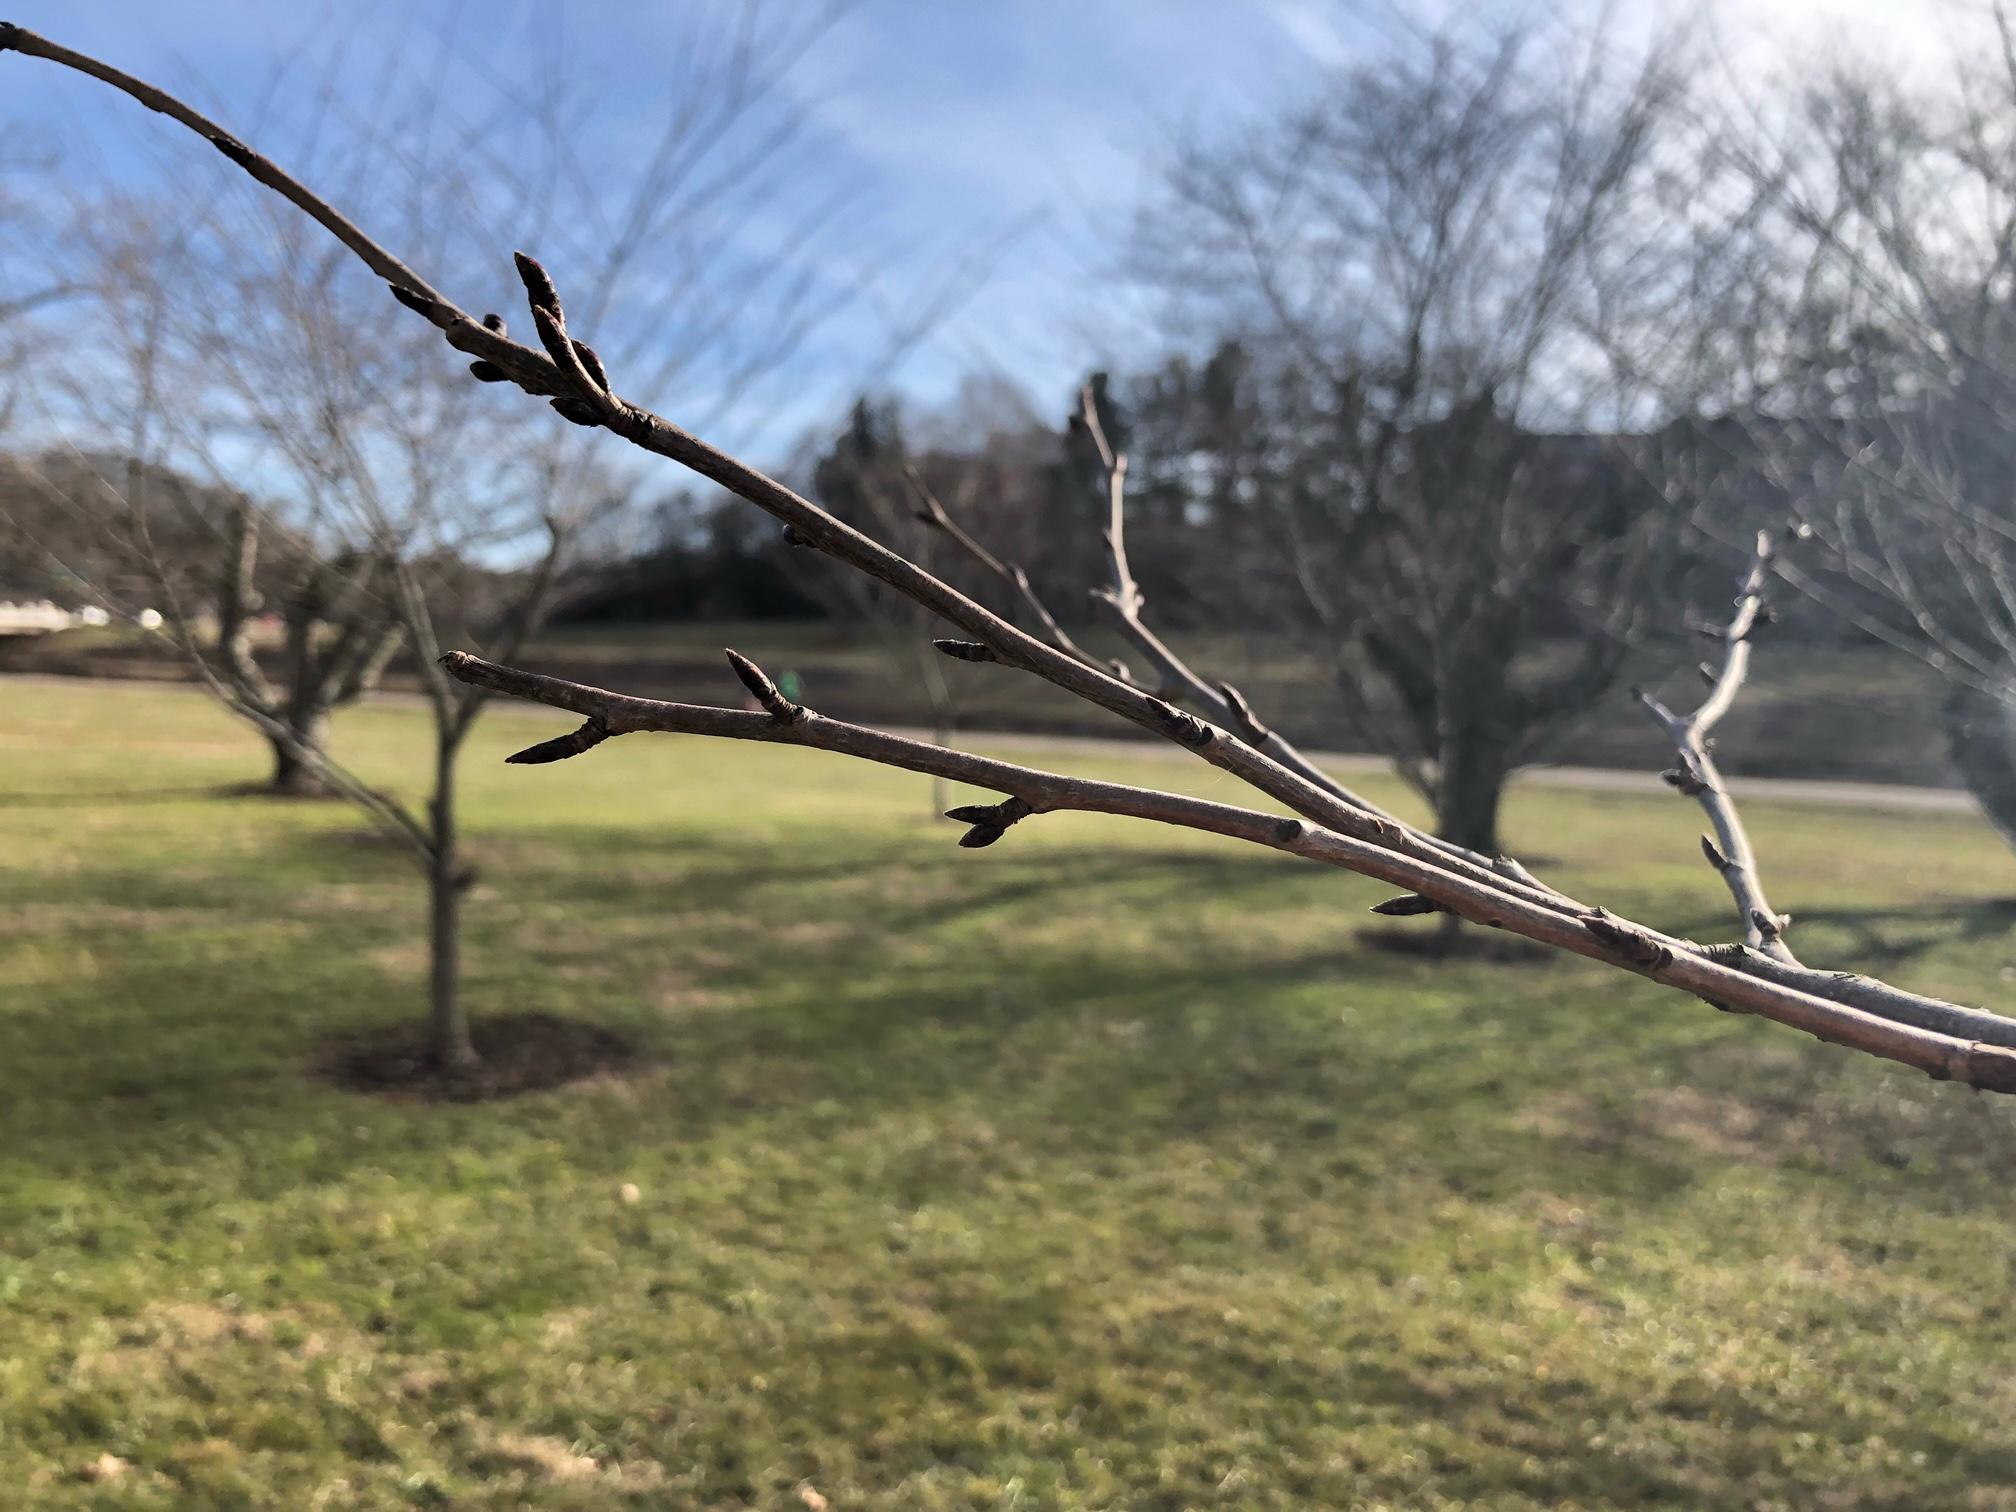 Buds starting to form on an up-close cherry tree branch